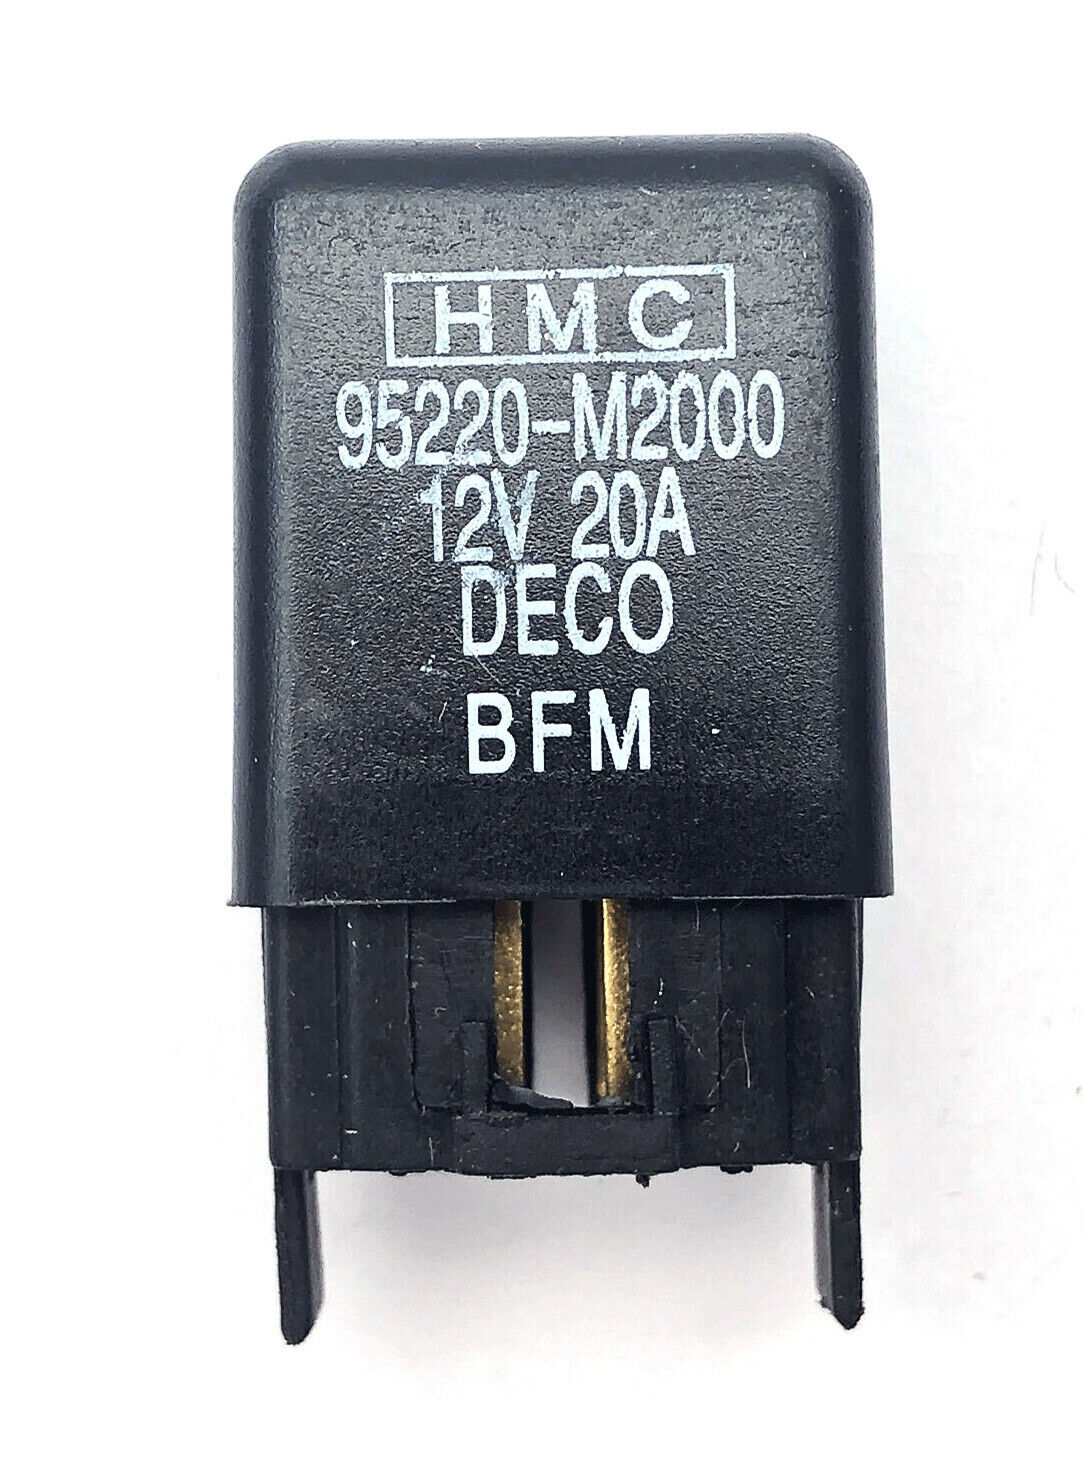 Deco 95220-m2000 Automotive Relay 4 Pin 12v 20a for sale online | eBay